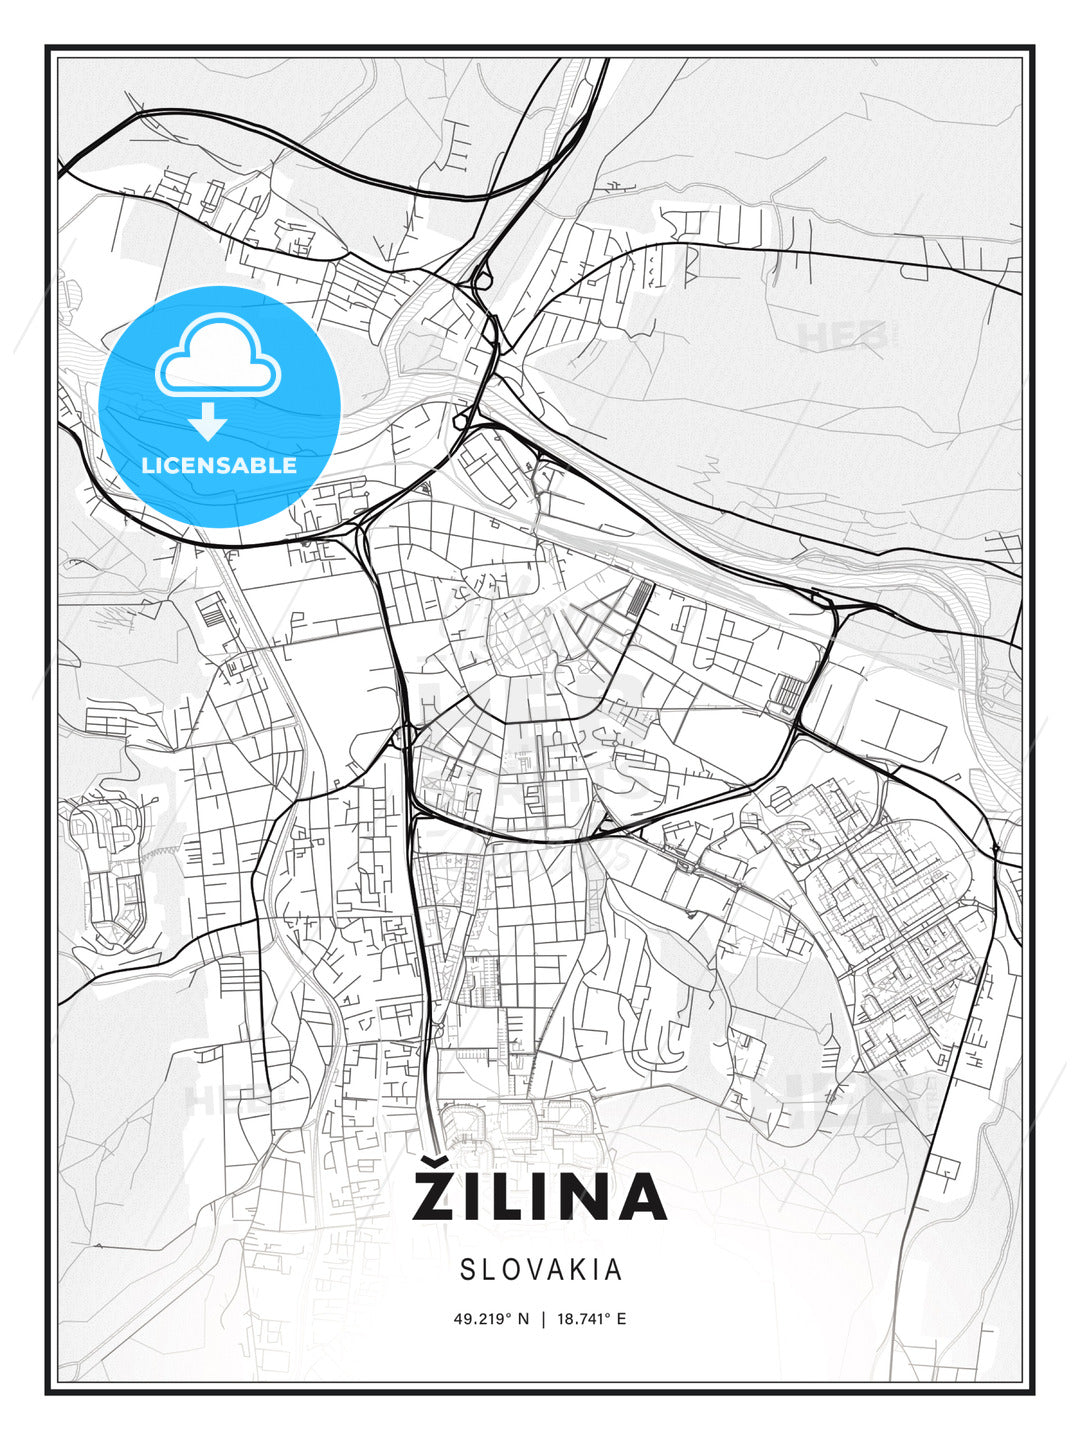 Žilina, Slovakia, Modern Print Template in Various Formats - HEBSTREITS Sketches